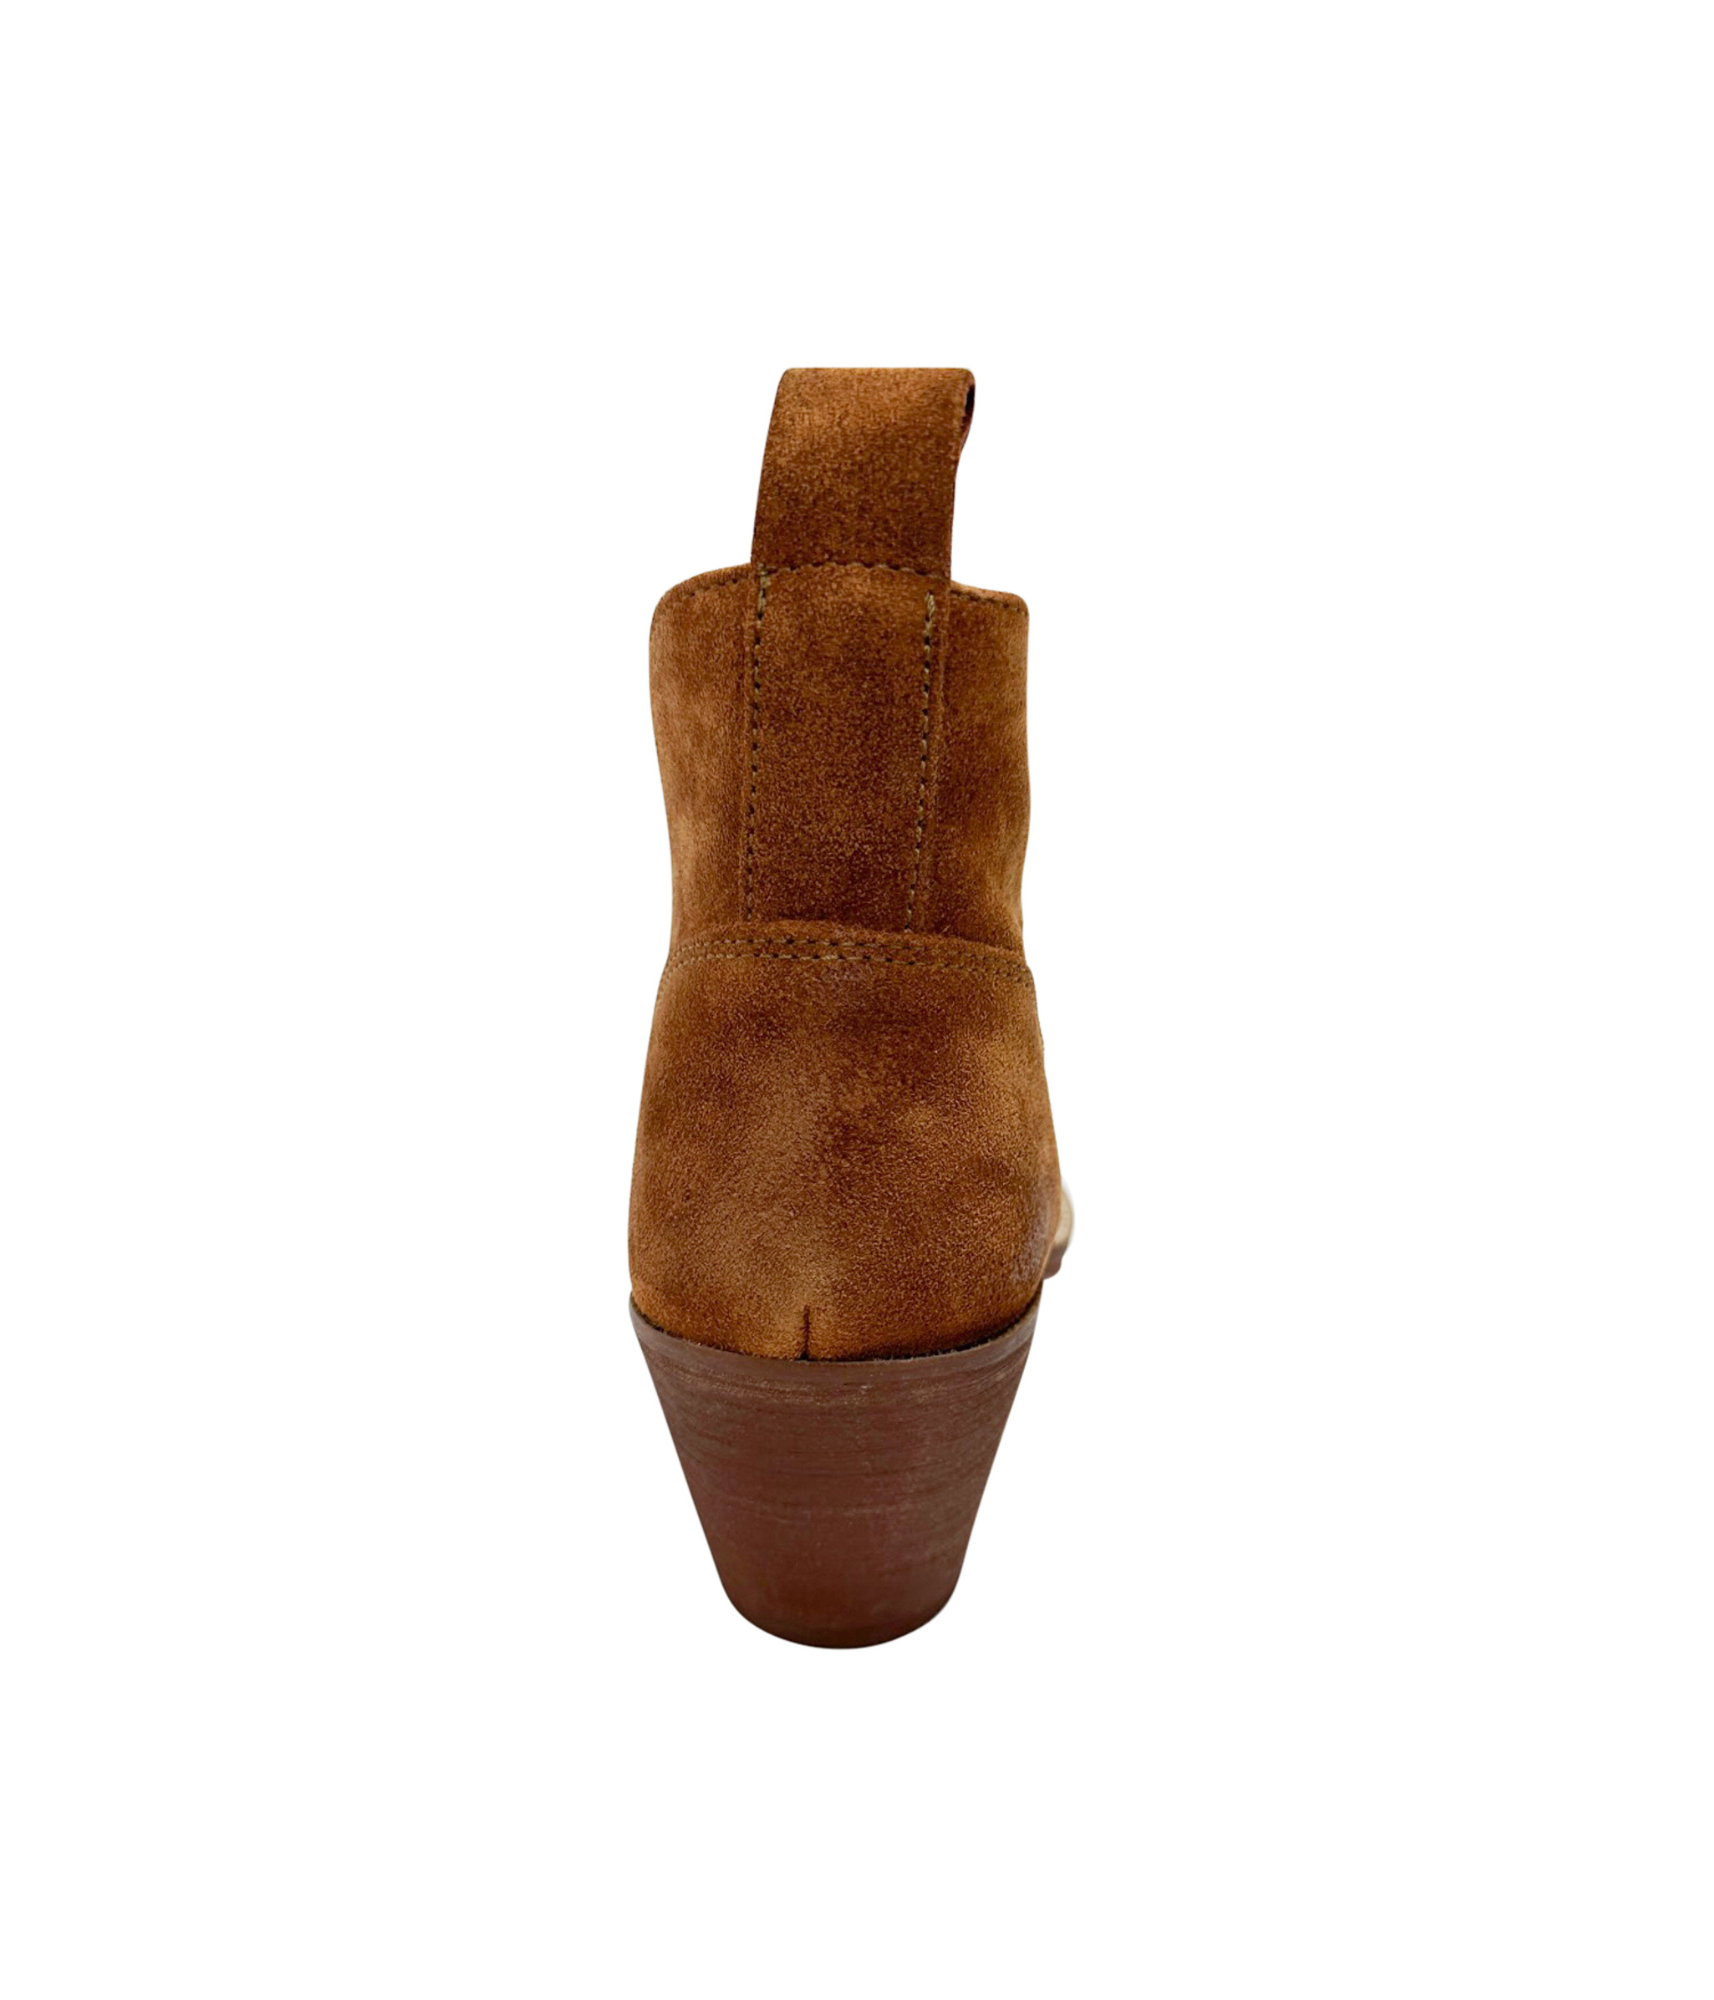 Bandit Suede Ankle Boot in Tan